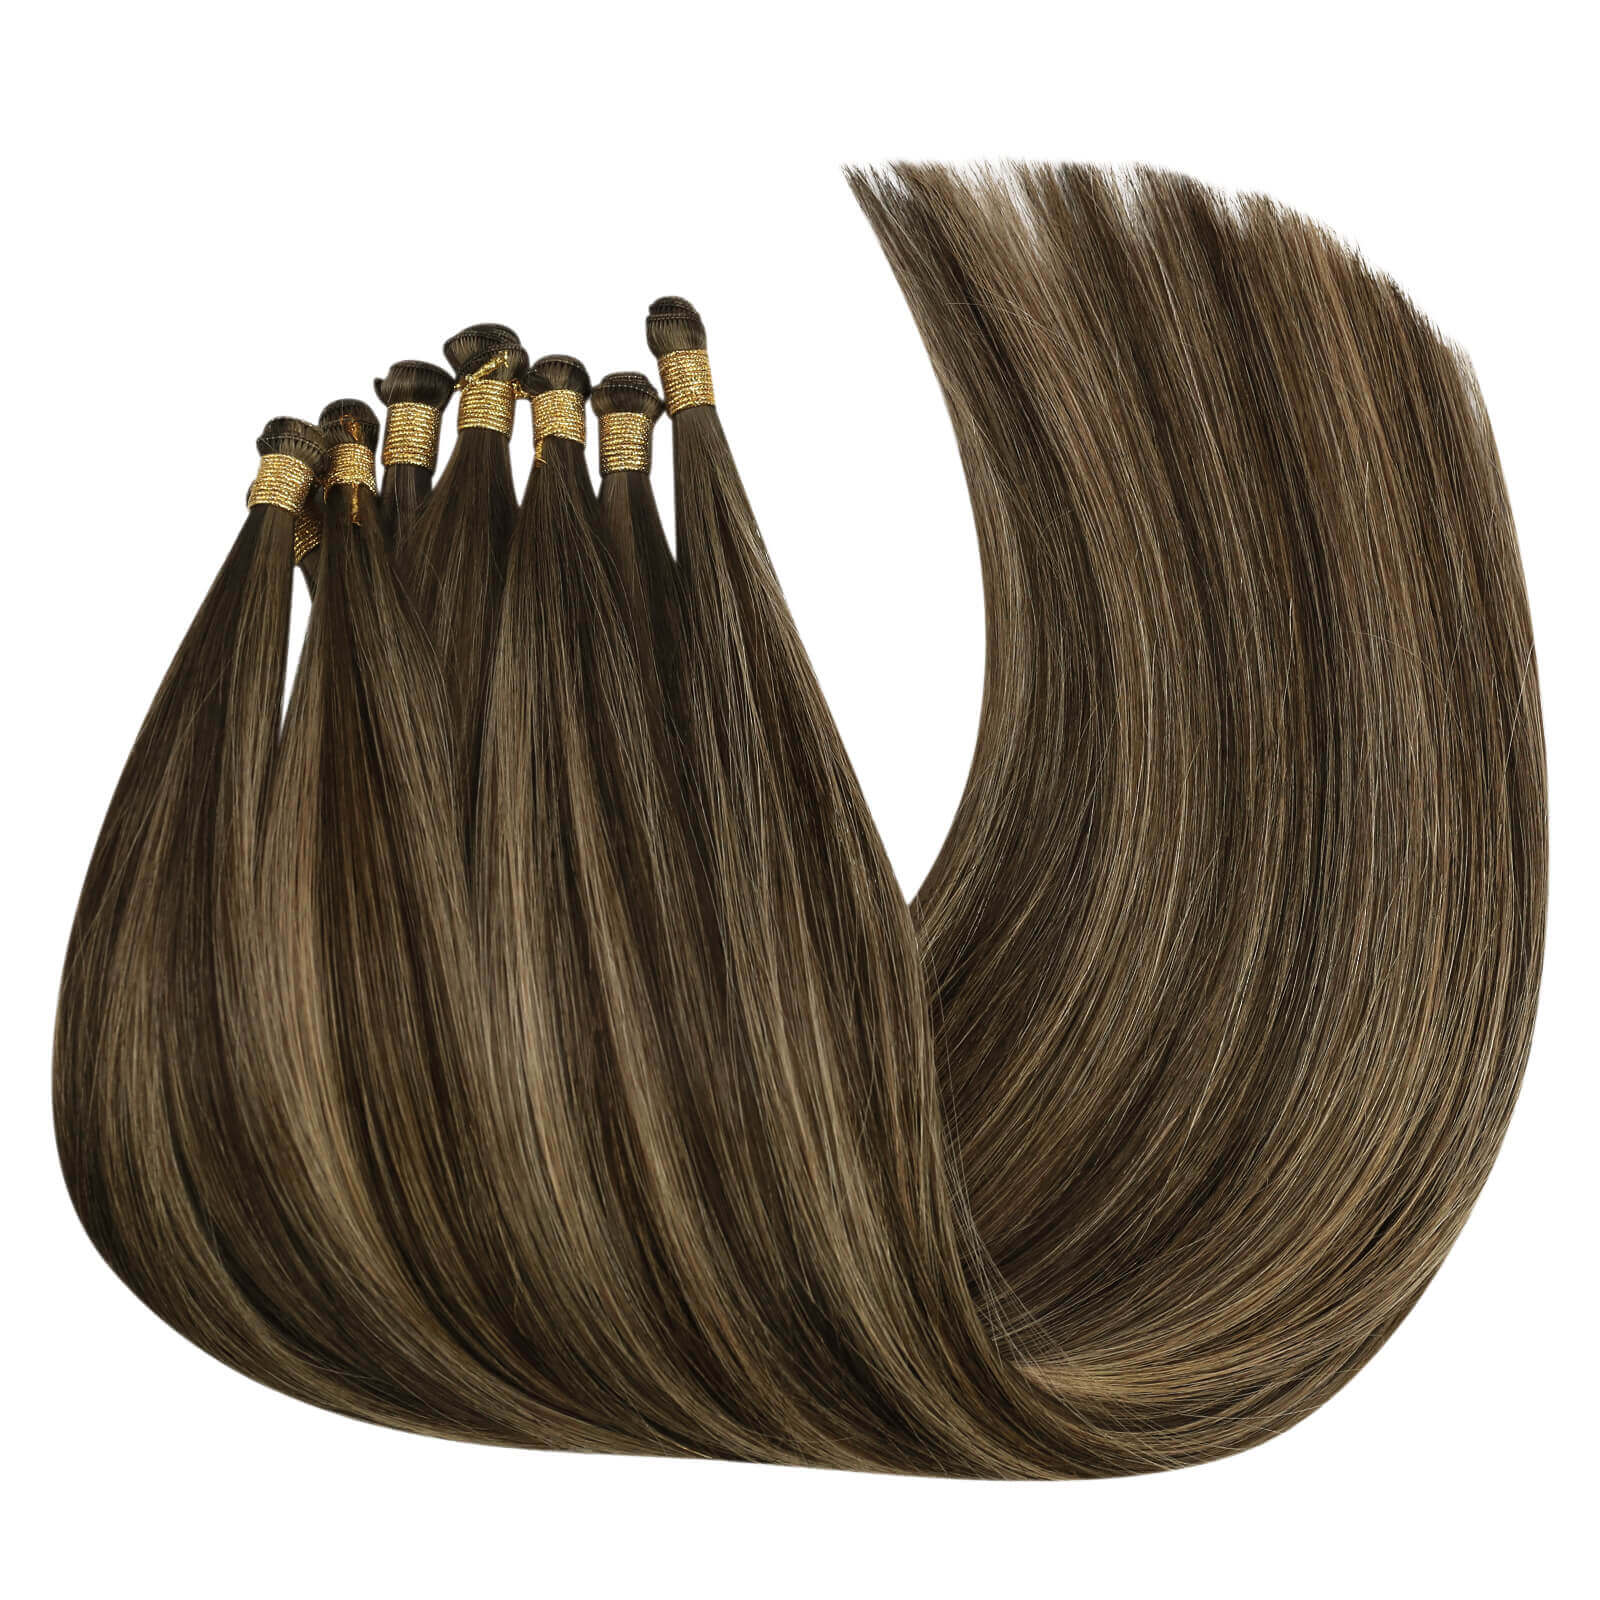 weft hair extensions,human hair extensions,hand tied hair extensions,sew in hair extensions